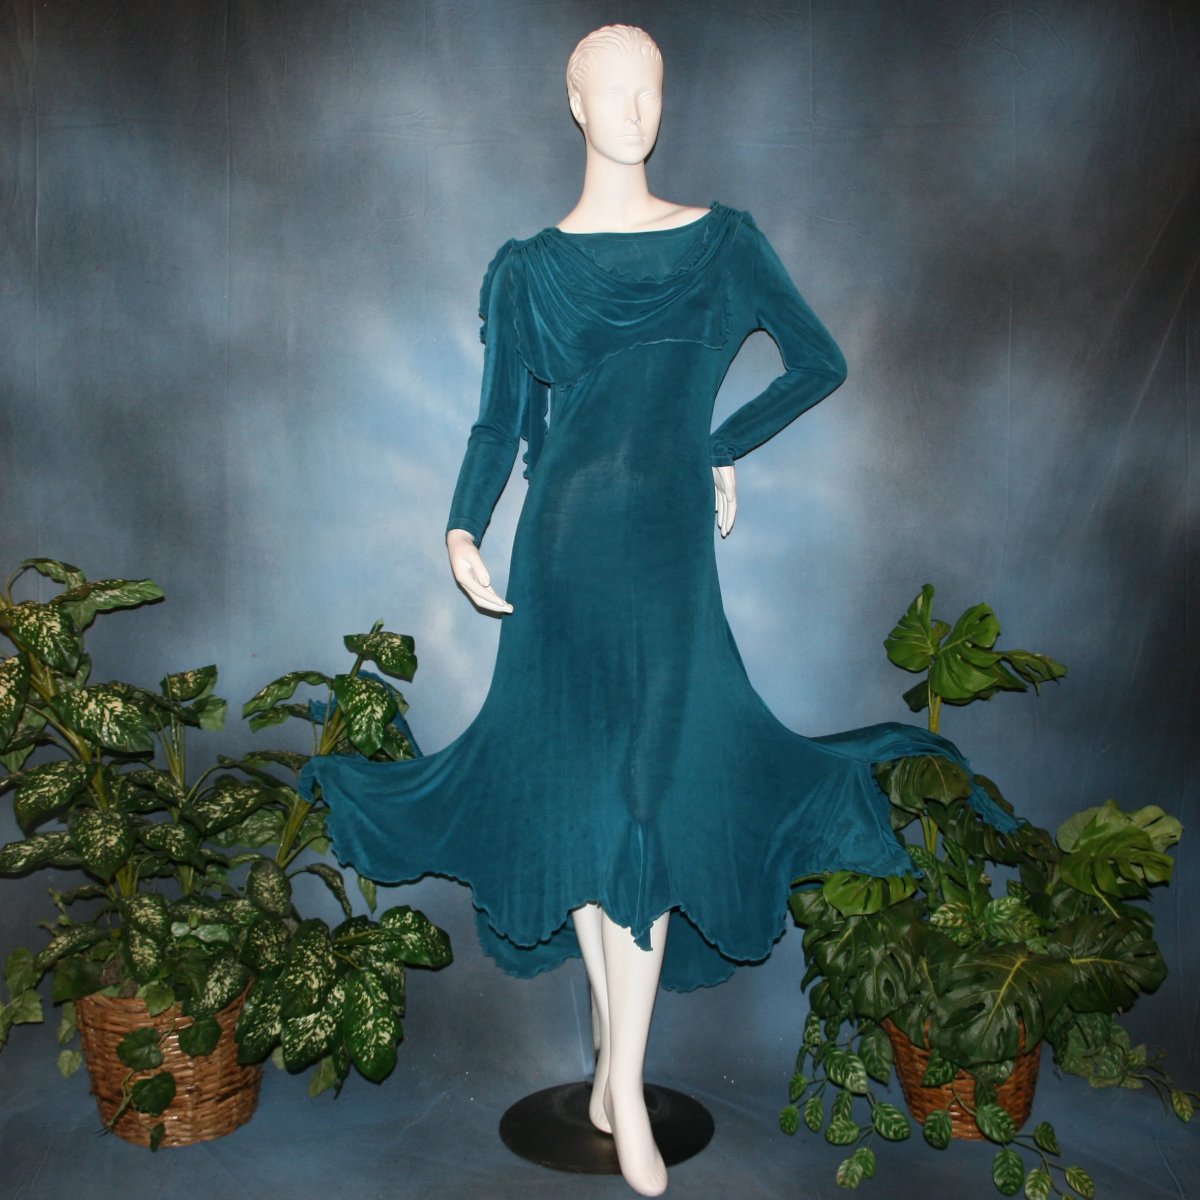 Blue social ballroom dress created in deep blue luxurious solid slinky fabric with attached draping on shoulders & scalloped skirt edge. Very full around bottom & can be a beginner ballroom dancer smooth dress.